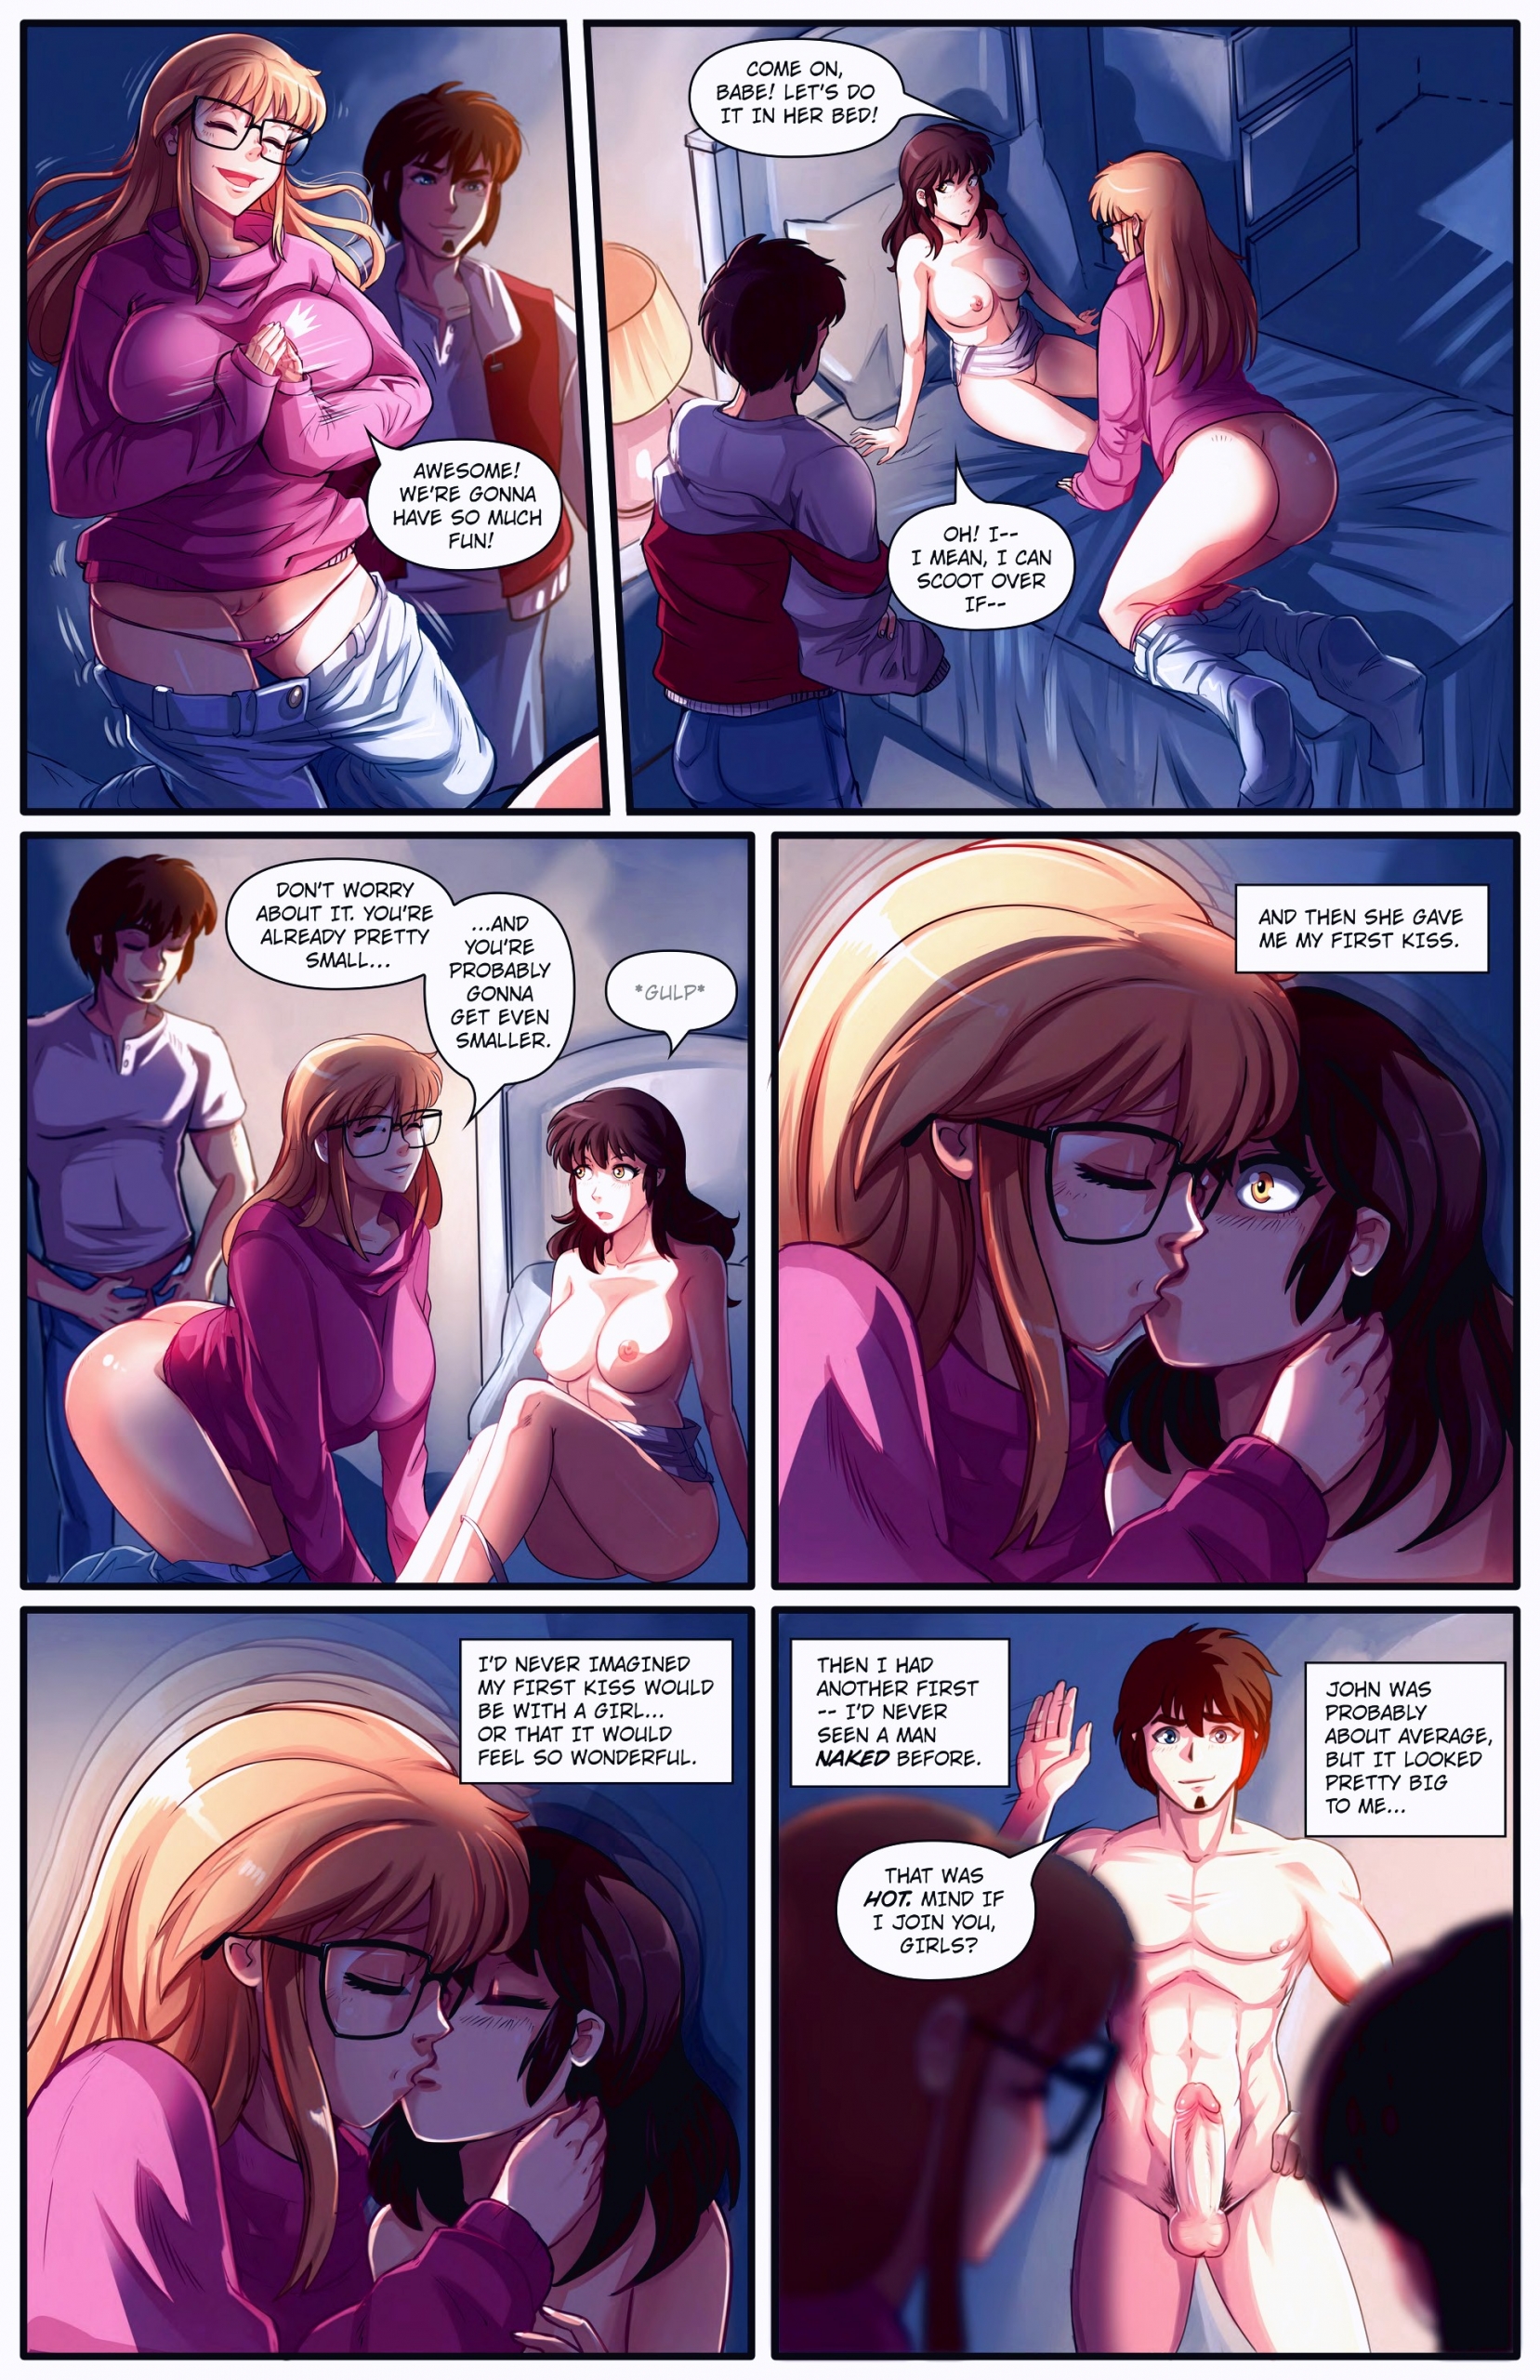 The Invisible Girl - chapters 1-2 [Shrink Fan Comics]